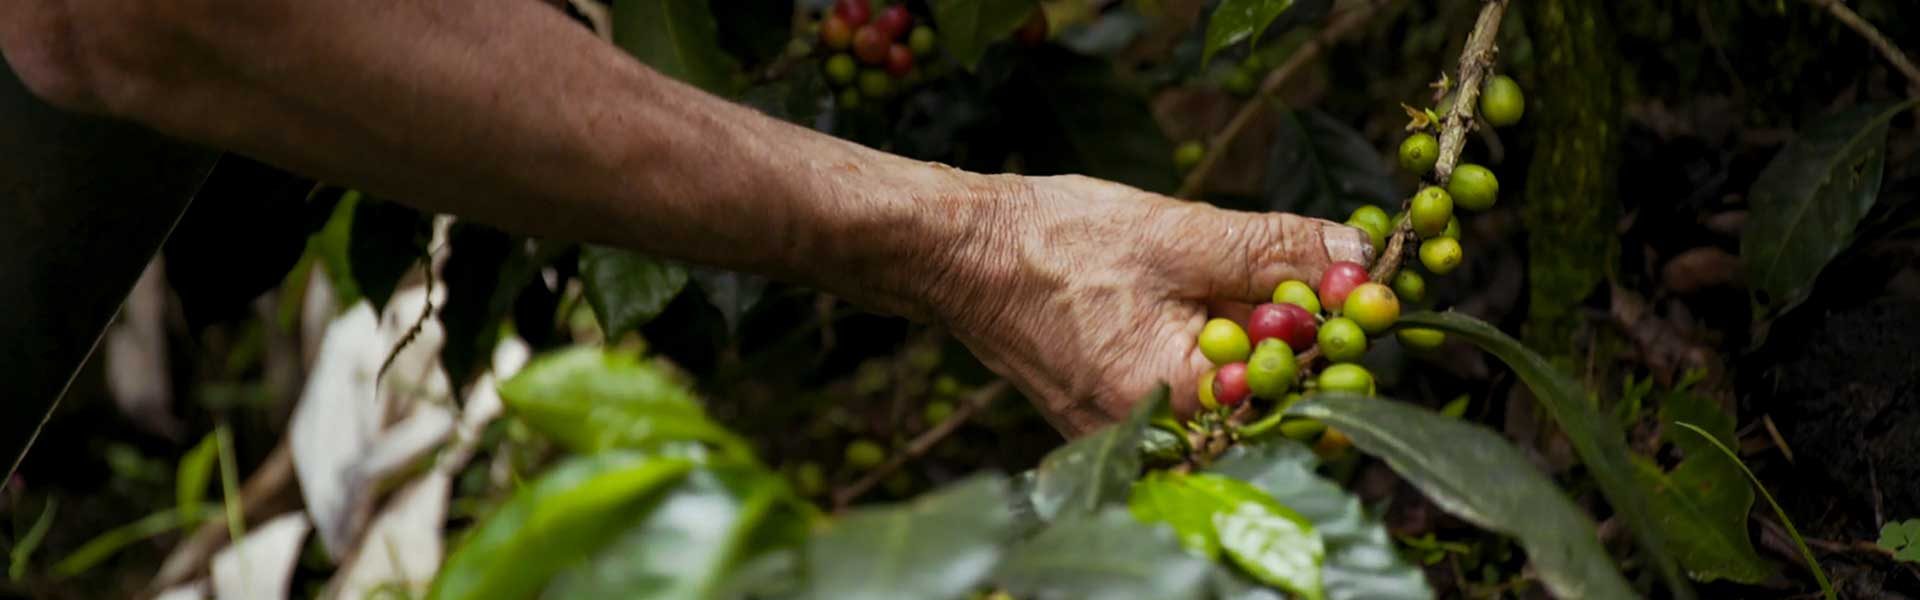 6 Fascinating Facts About Coffee Harvesting